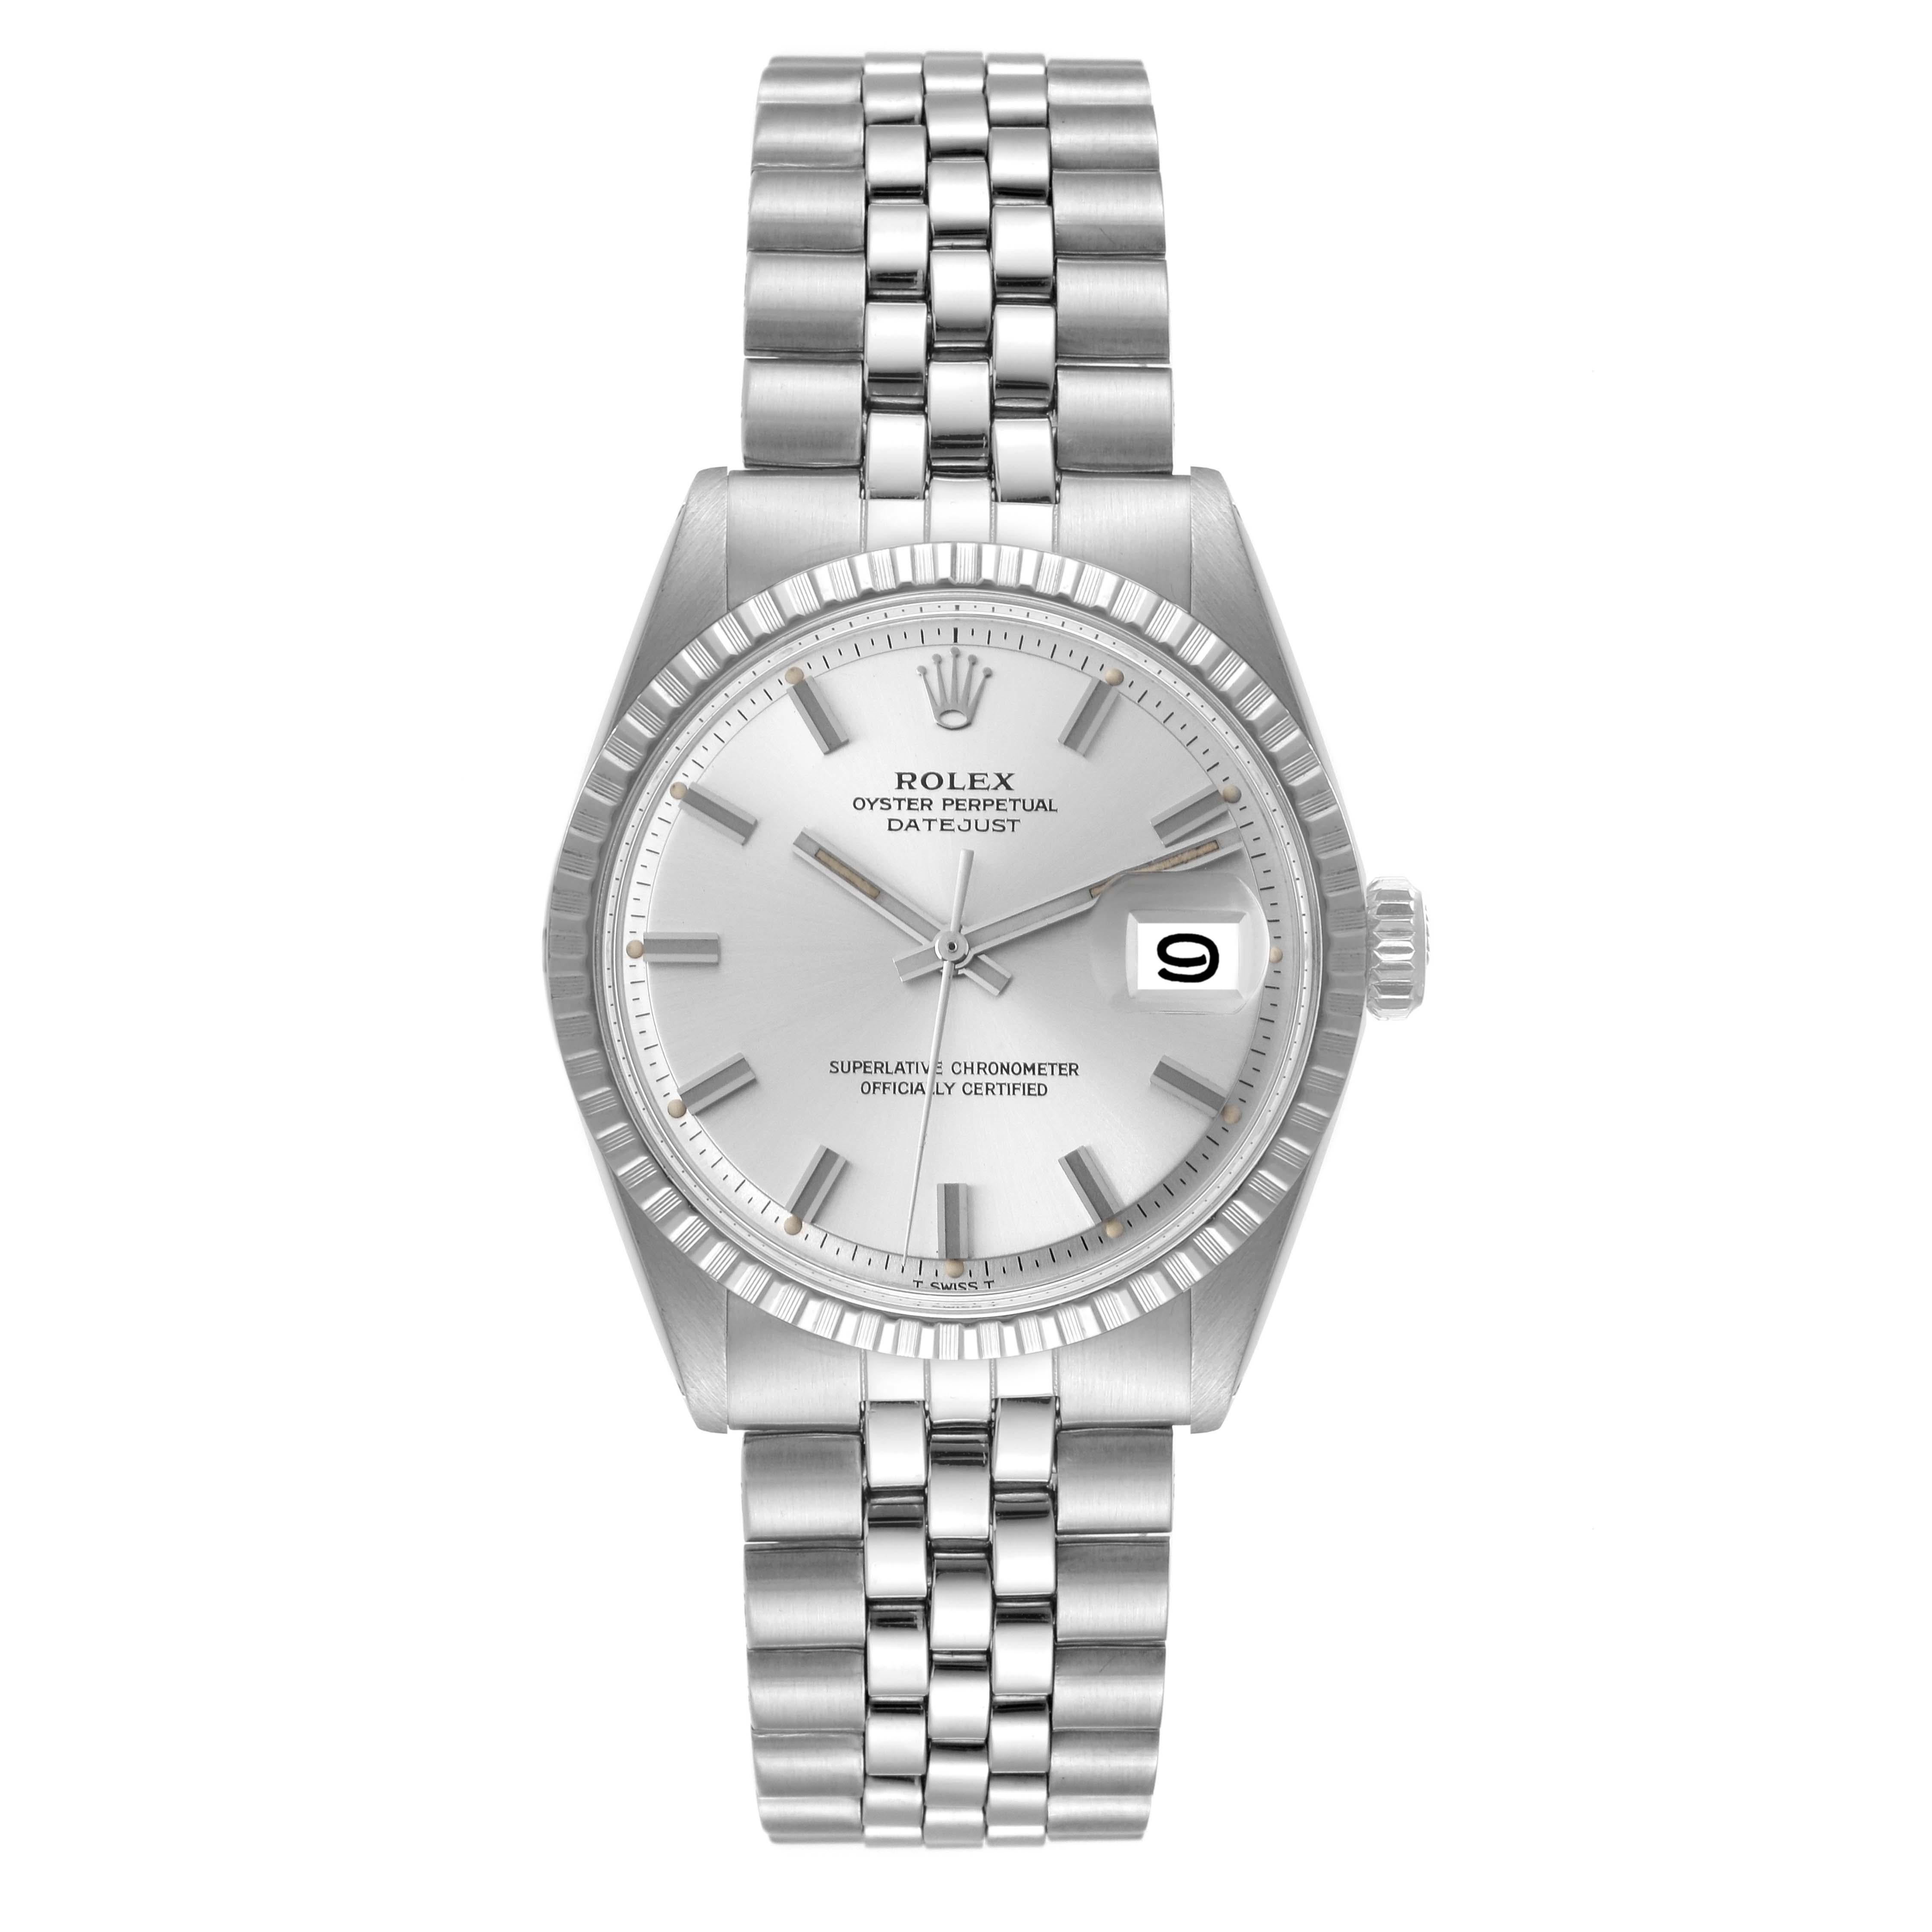 Rolex Datejust Silver Dial Engine Turned Bezel Steel Vintage Mens Watch 1603. Officially certified chronometer automatic self-winding movement. Stainless steel oyster case 36.0 mm in diameter. Rolex logo on the crown. Stainless steel engine turned